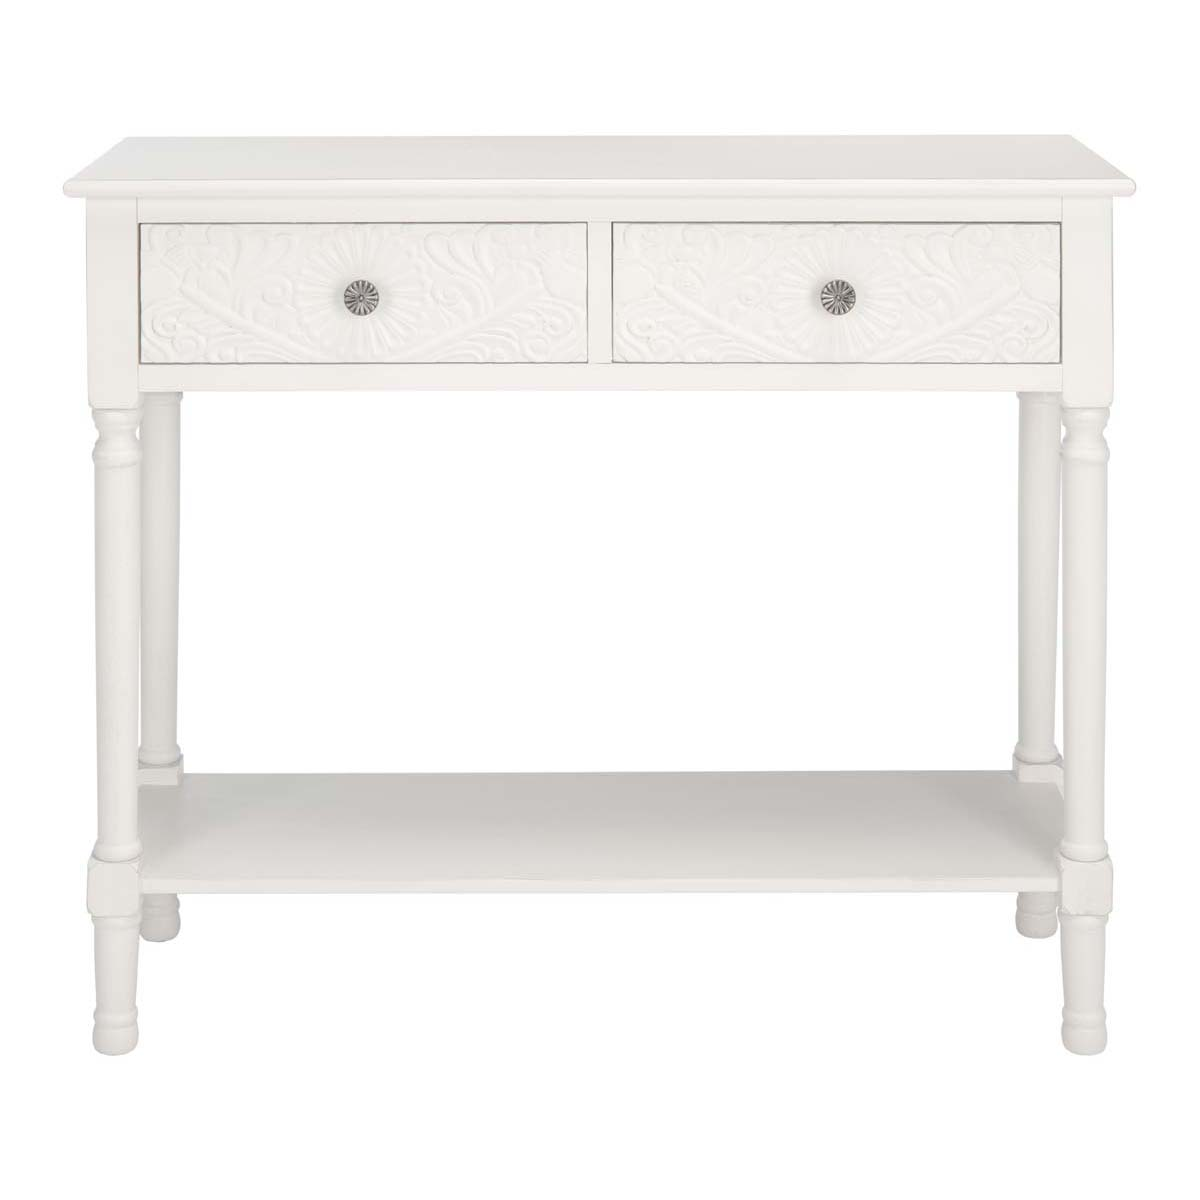 Safavieh Josie 2 Drawer Console Table , CNS5708 - Distressed White